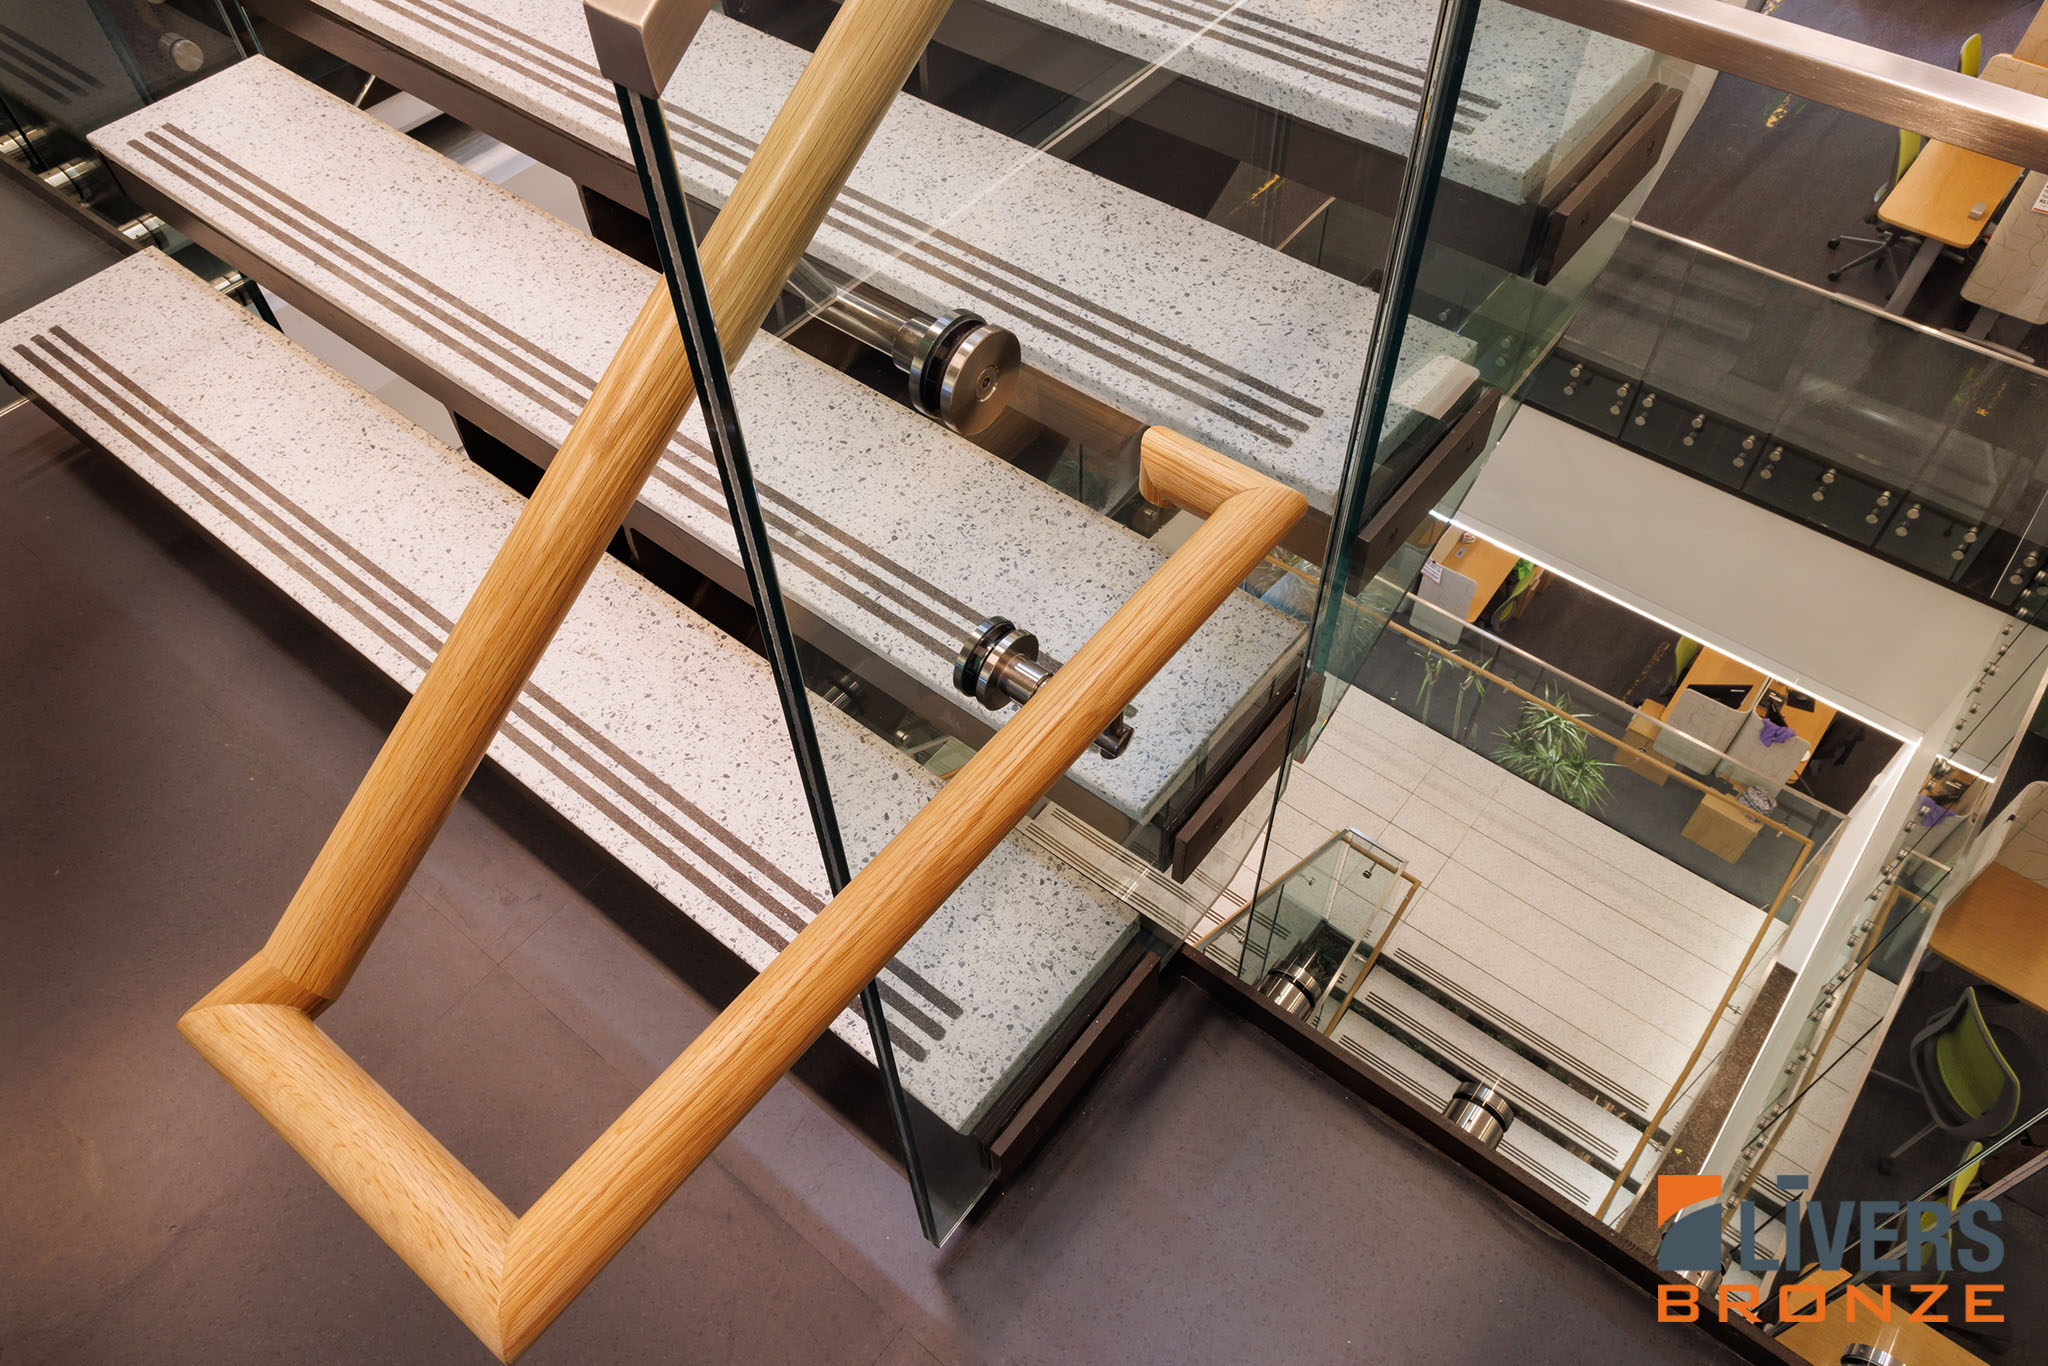 Livers Bronze Button Glass Railing System was installed at the lobby stairway at Lehigh University's Health, Science & Technology Building and is Made in the USA.